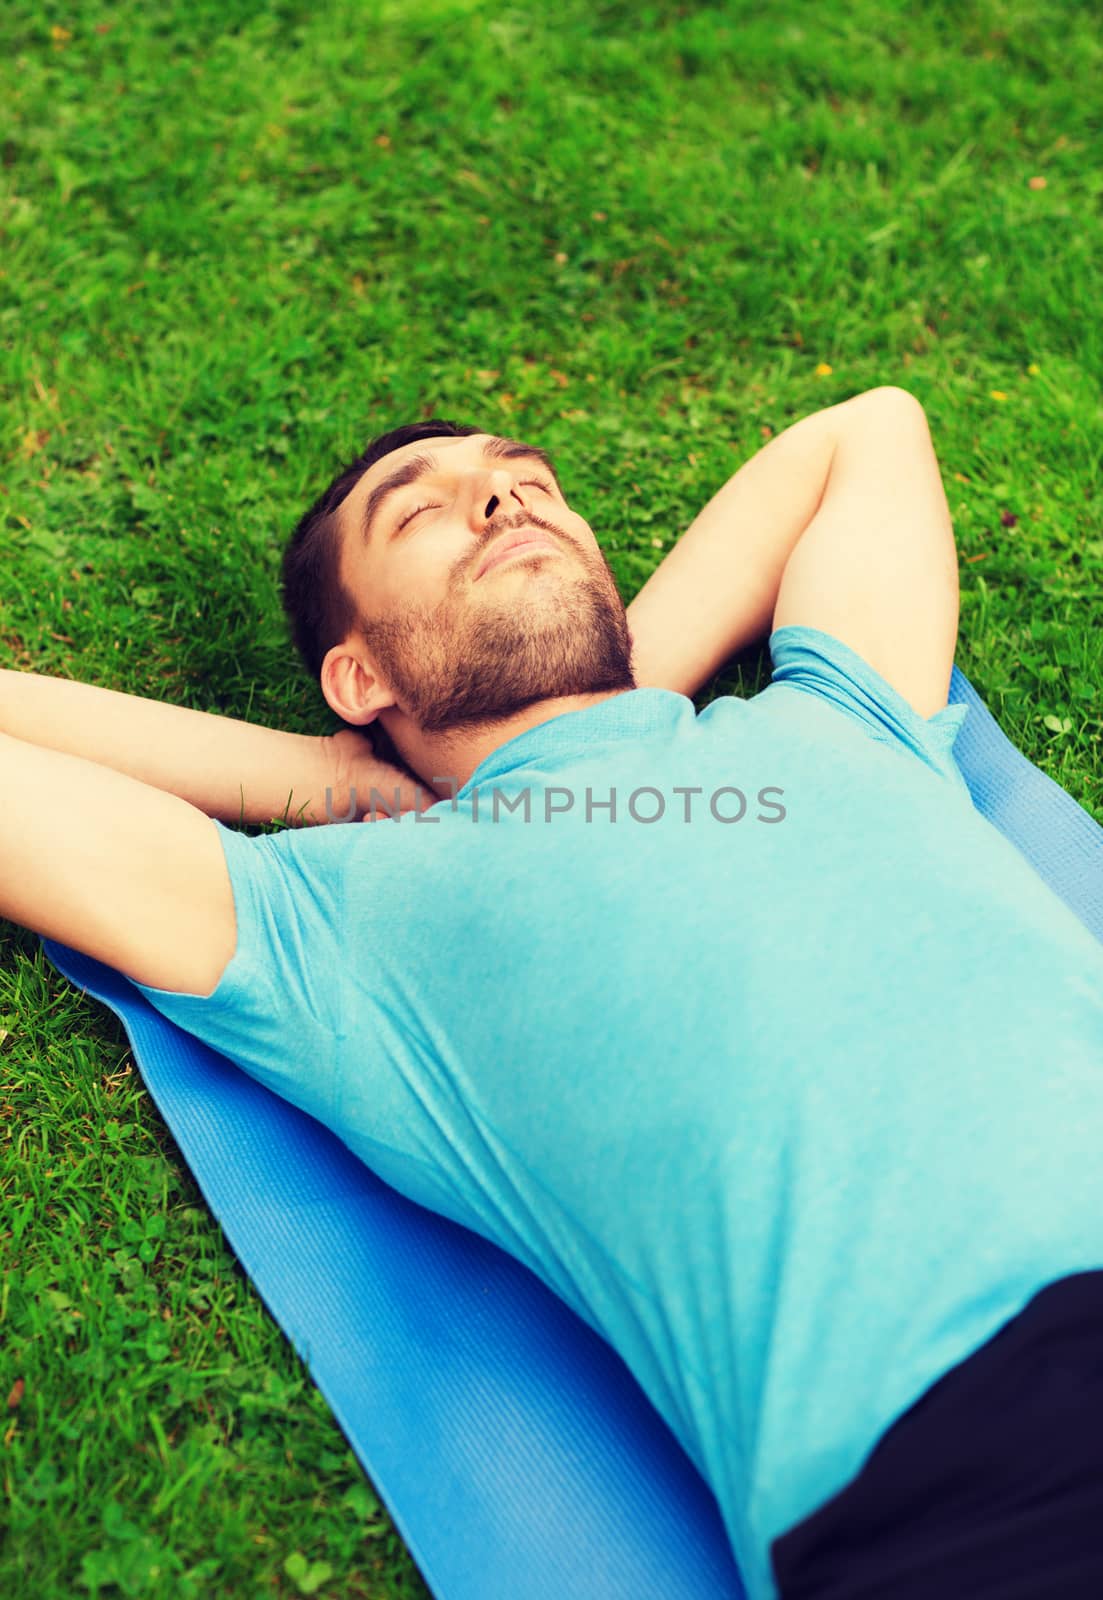 fitness, sport, training and lifestyle concept - smiling man lying on mat outdoors